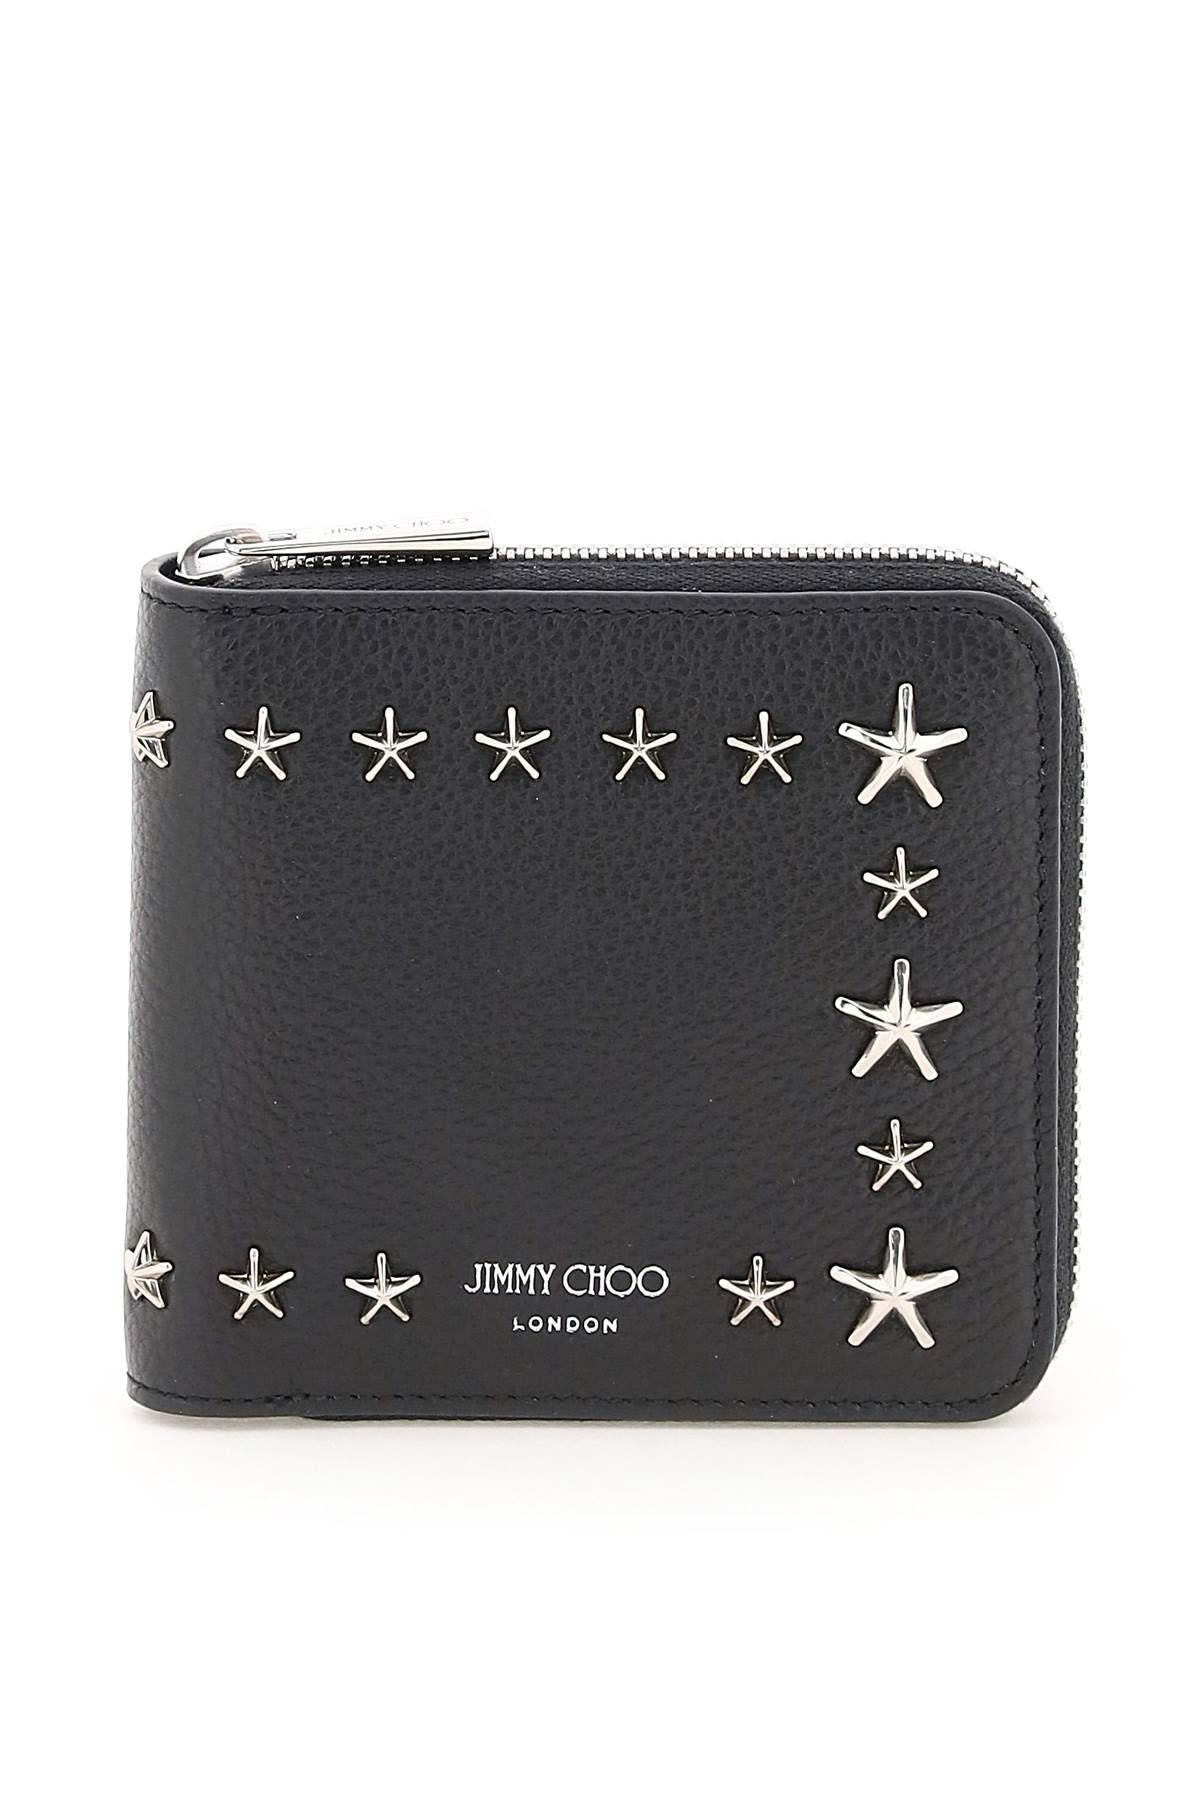 Jimmy Choo Leather Star Zip Around Wallet in Black Silver (Black) for Men -  Save 12% | Lyst